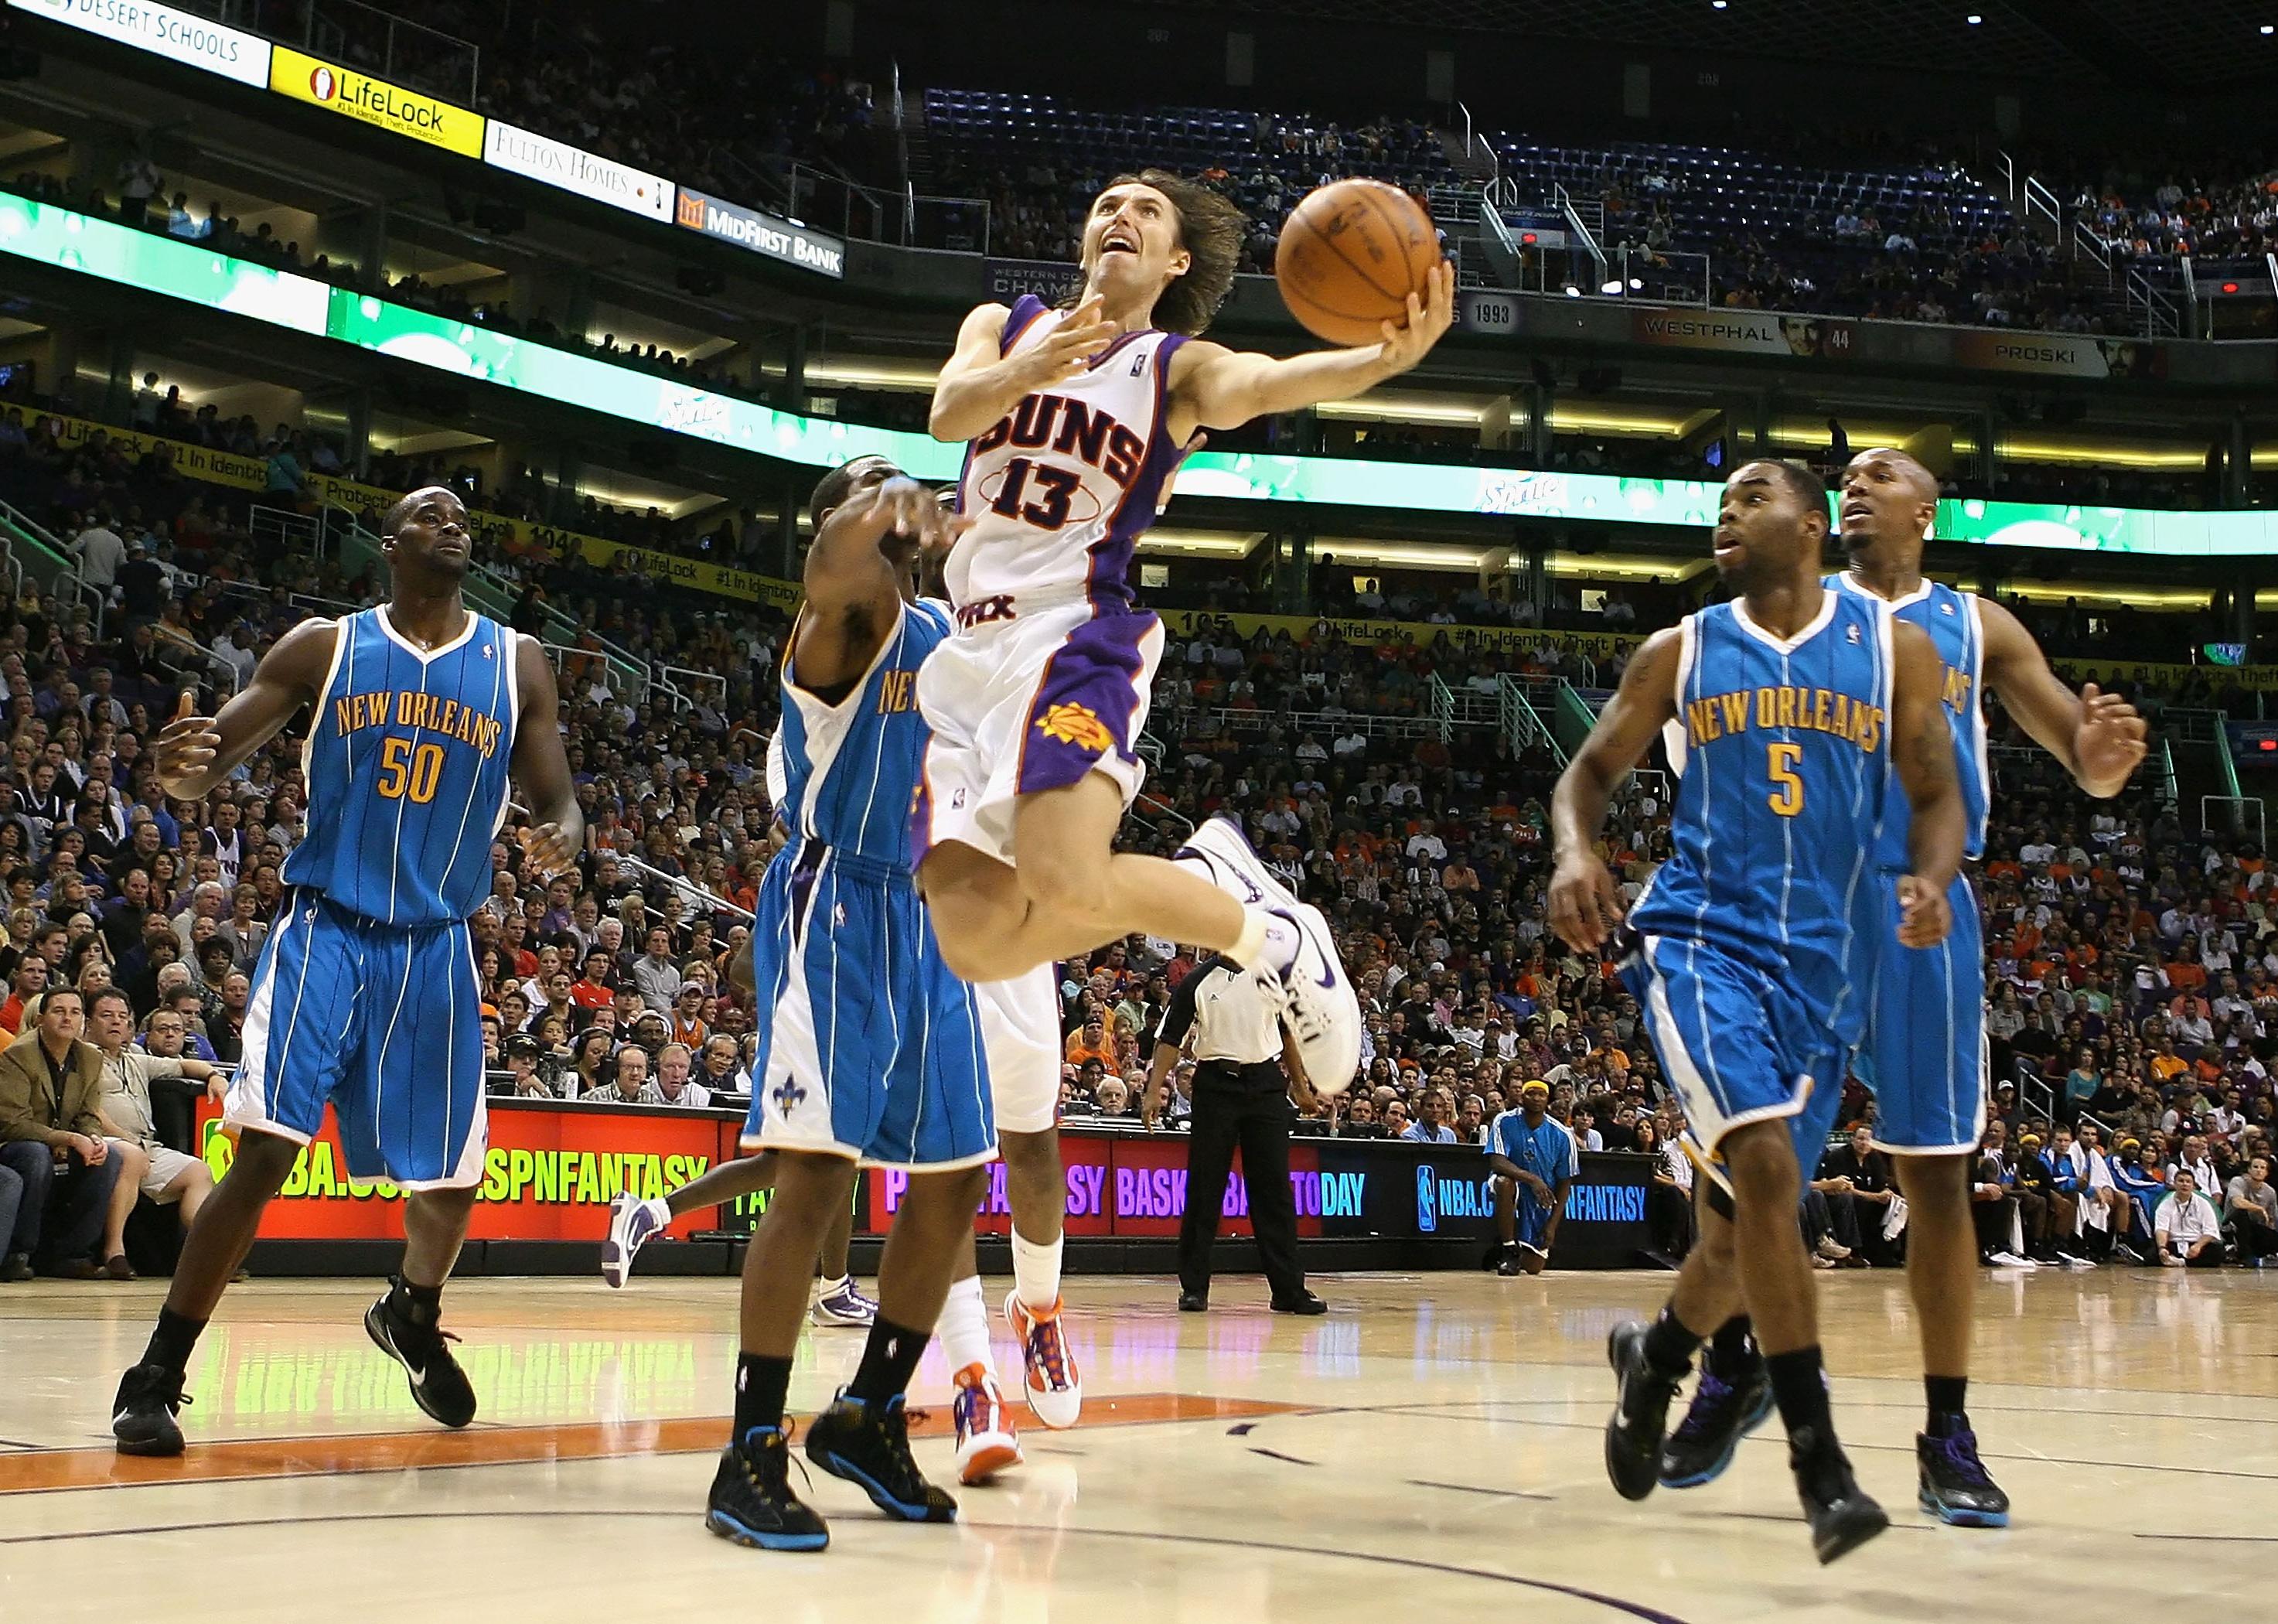 Steve Nash shooting the ball during a game at US Airways Center.